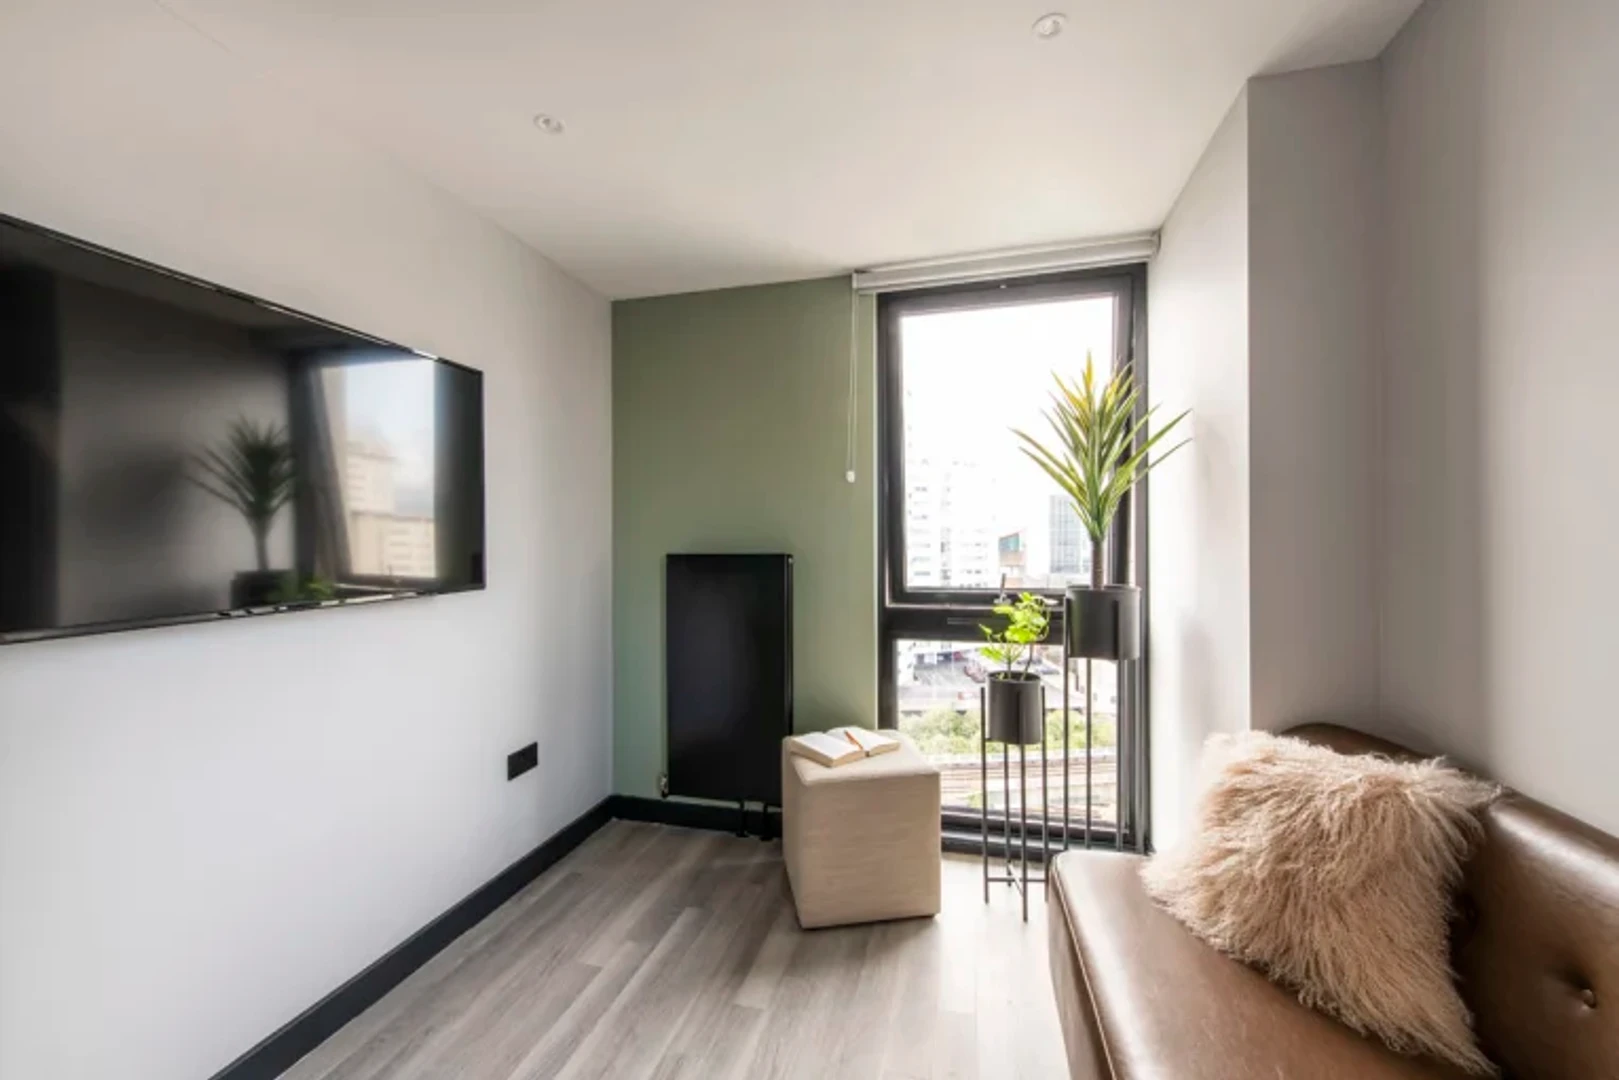 Modern and bright flat in Cardiff